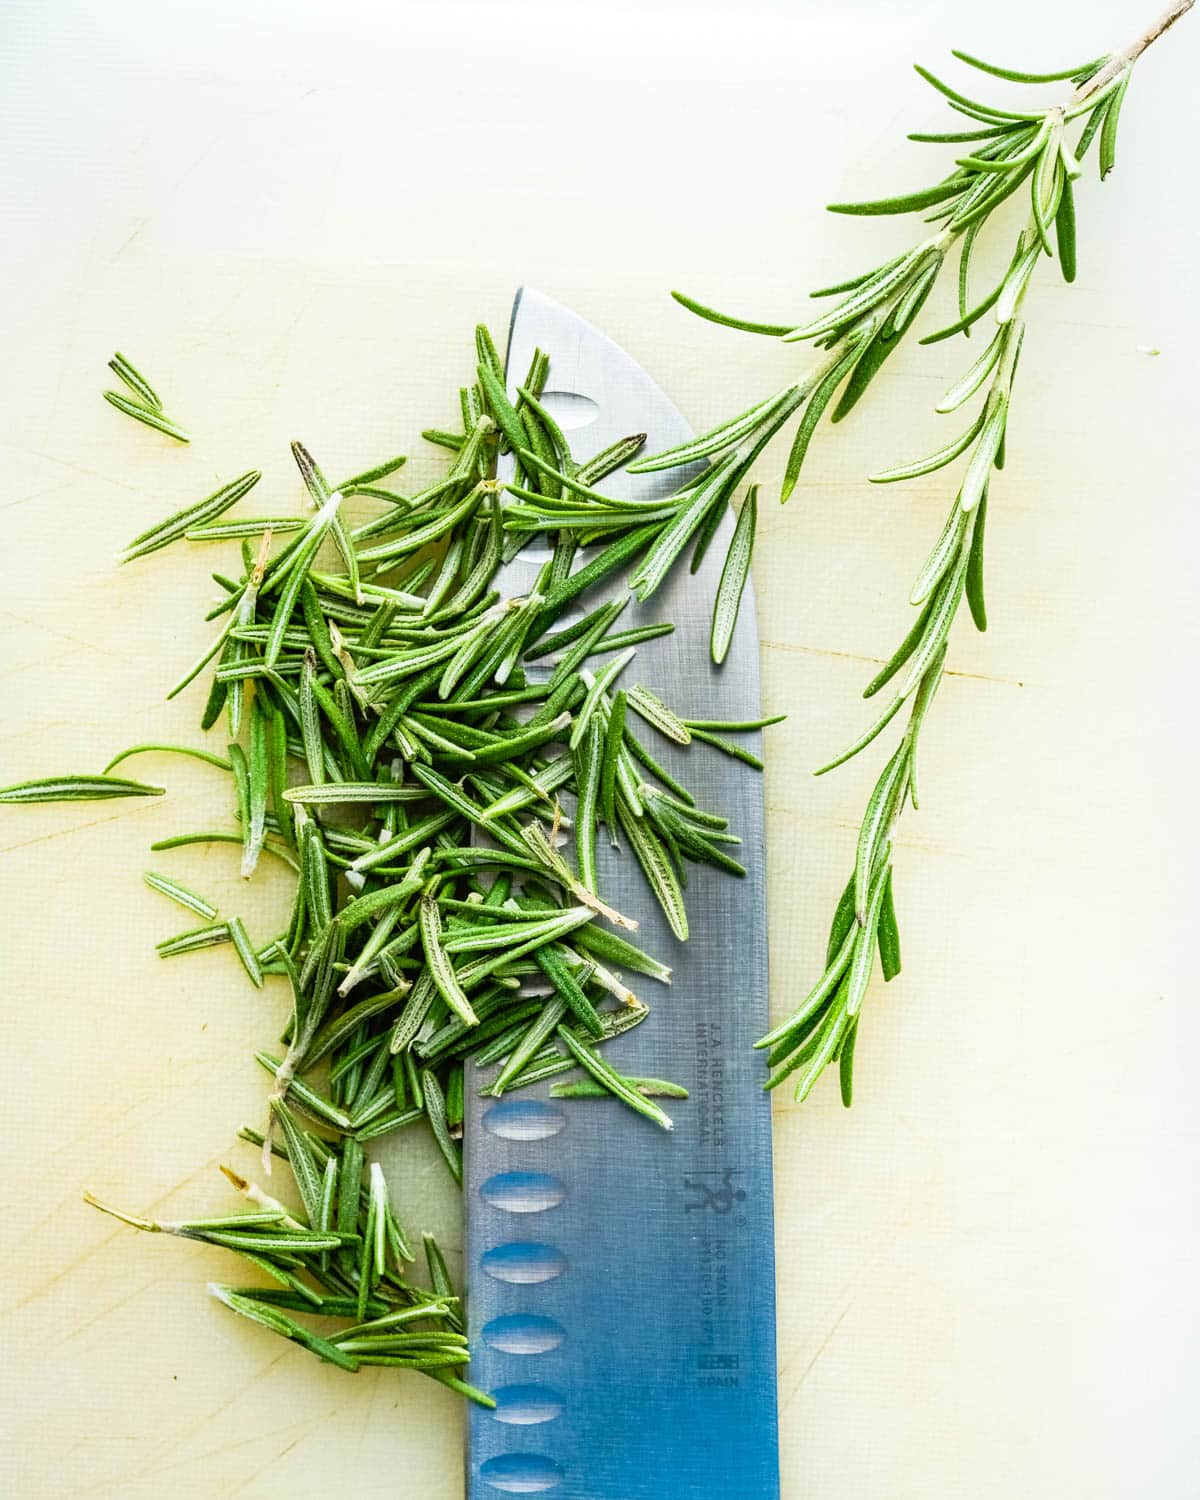 Chopping fresh rosemary for the cookies.